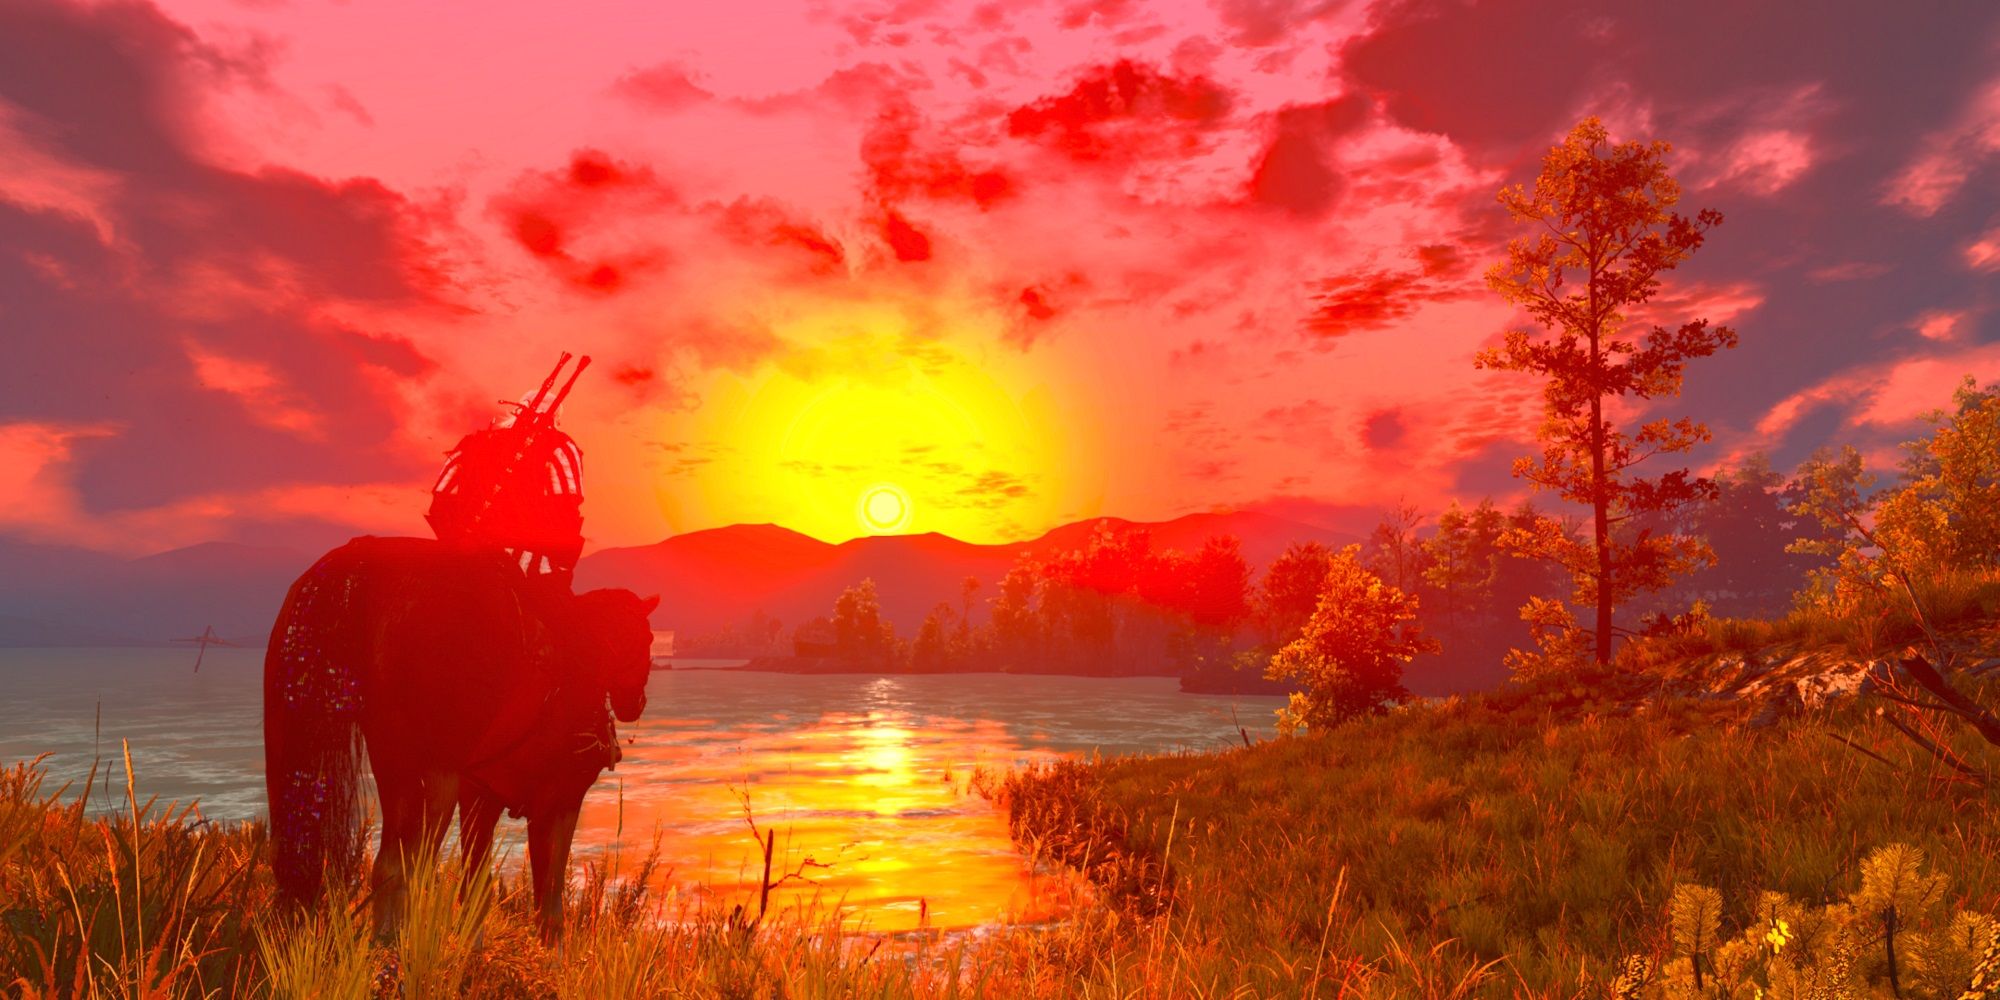 The Witcher 3 Geralt on Roach staring across a lake at sunset